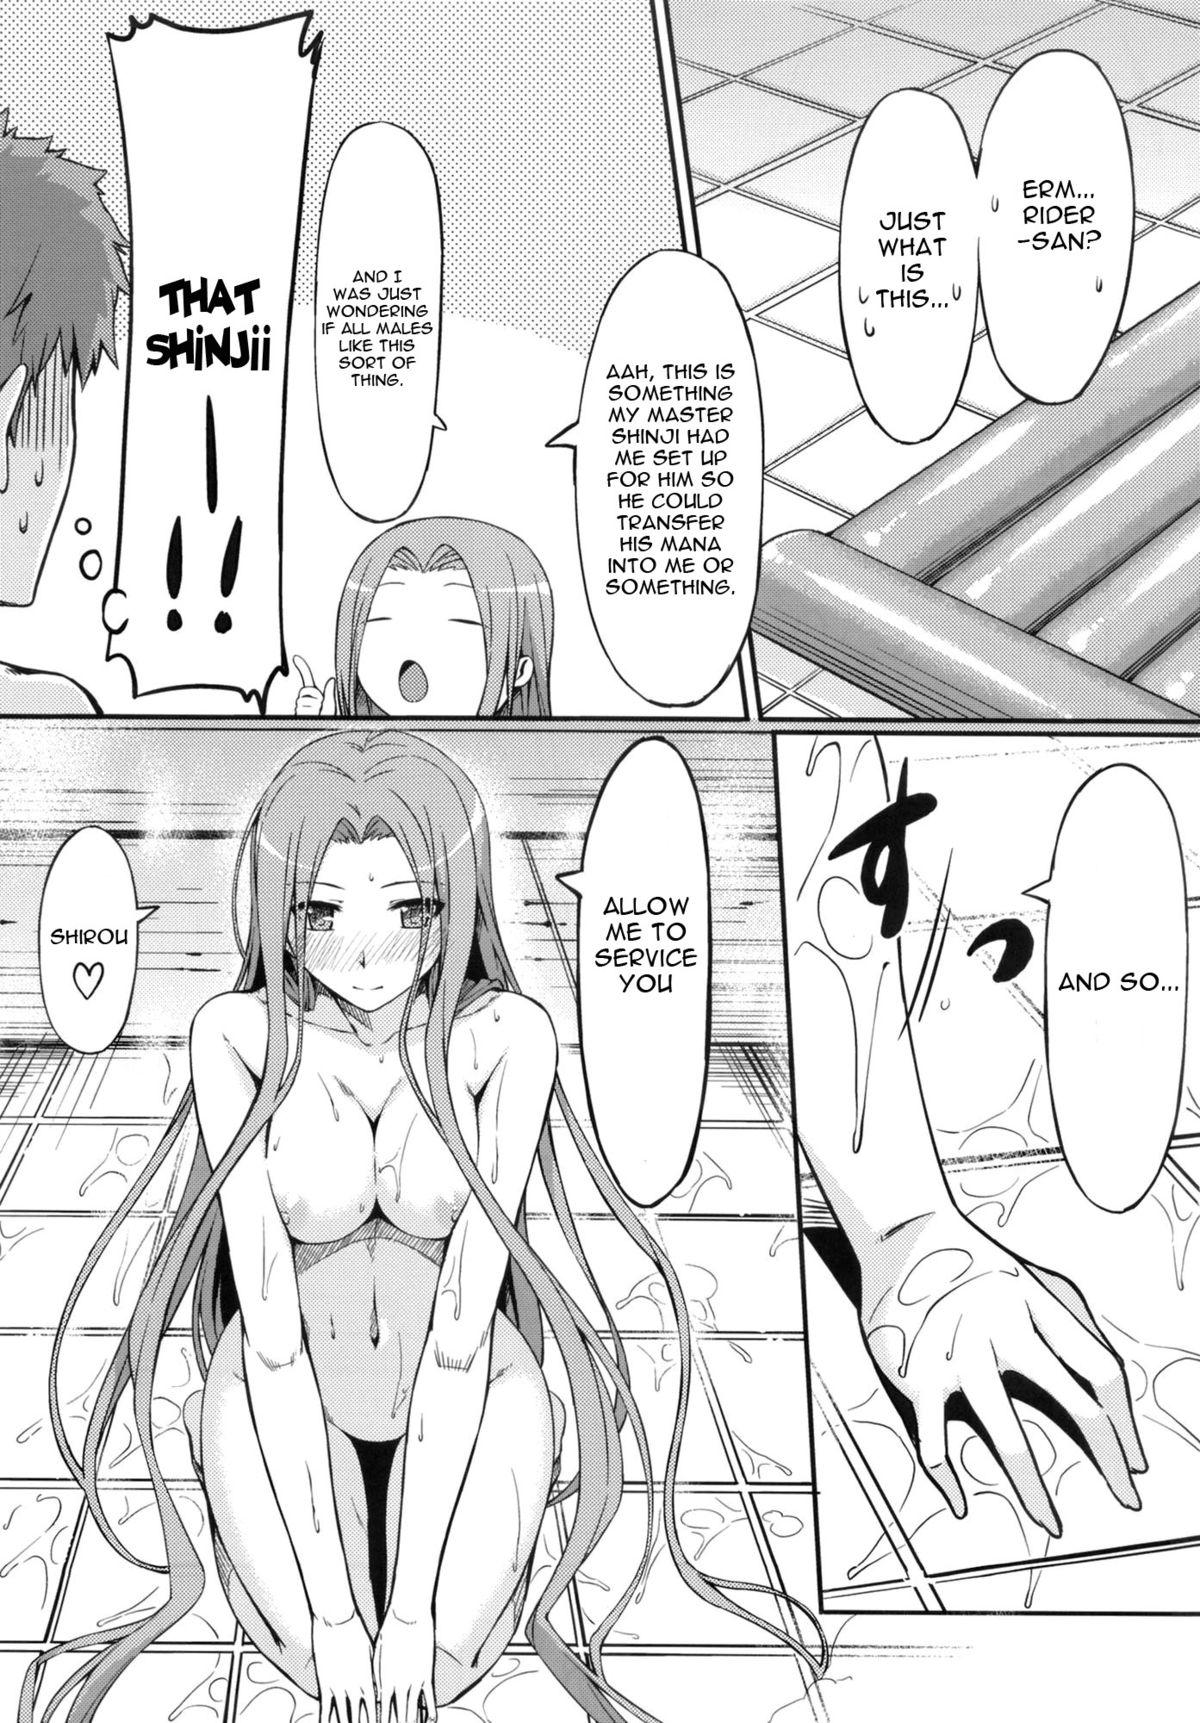 Moms Rider san to Ofuro. | Bathing with Rider-san. - Fate stay night Fate hollow ataraxia Gay Brokenboys - Page 6